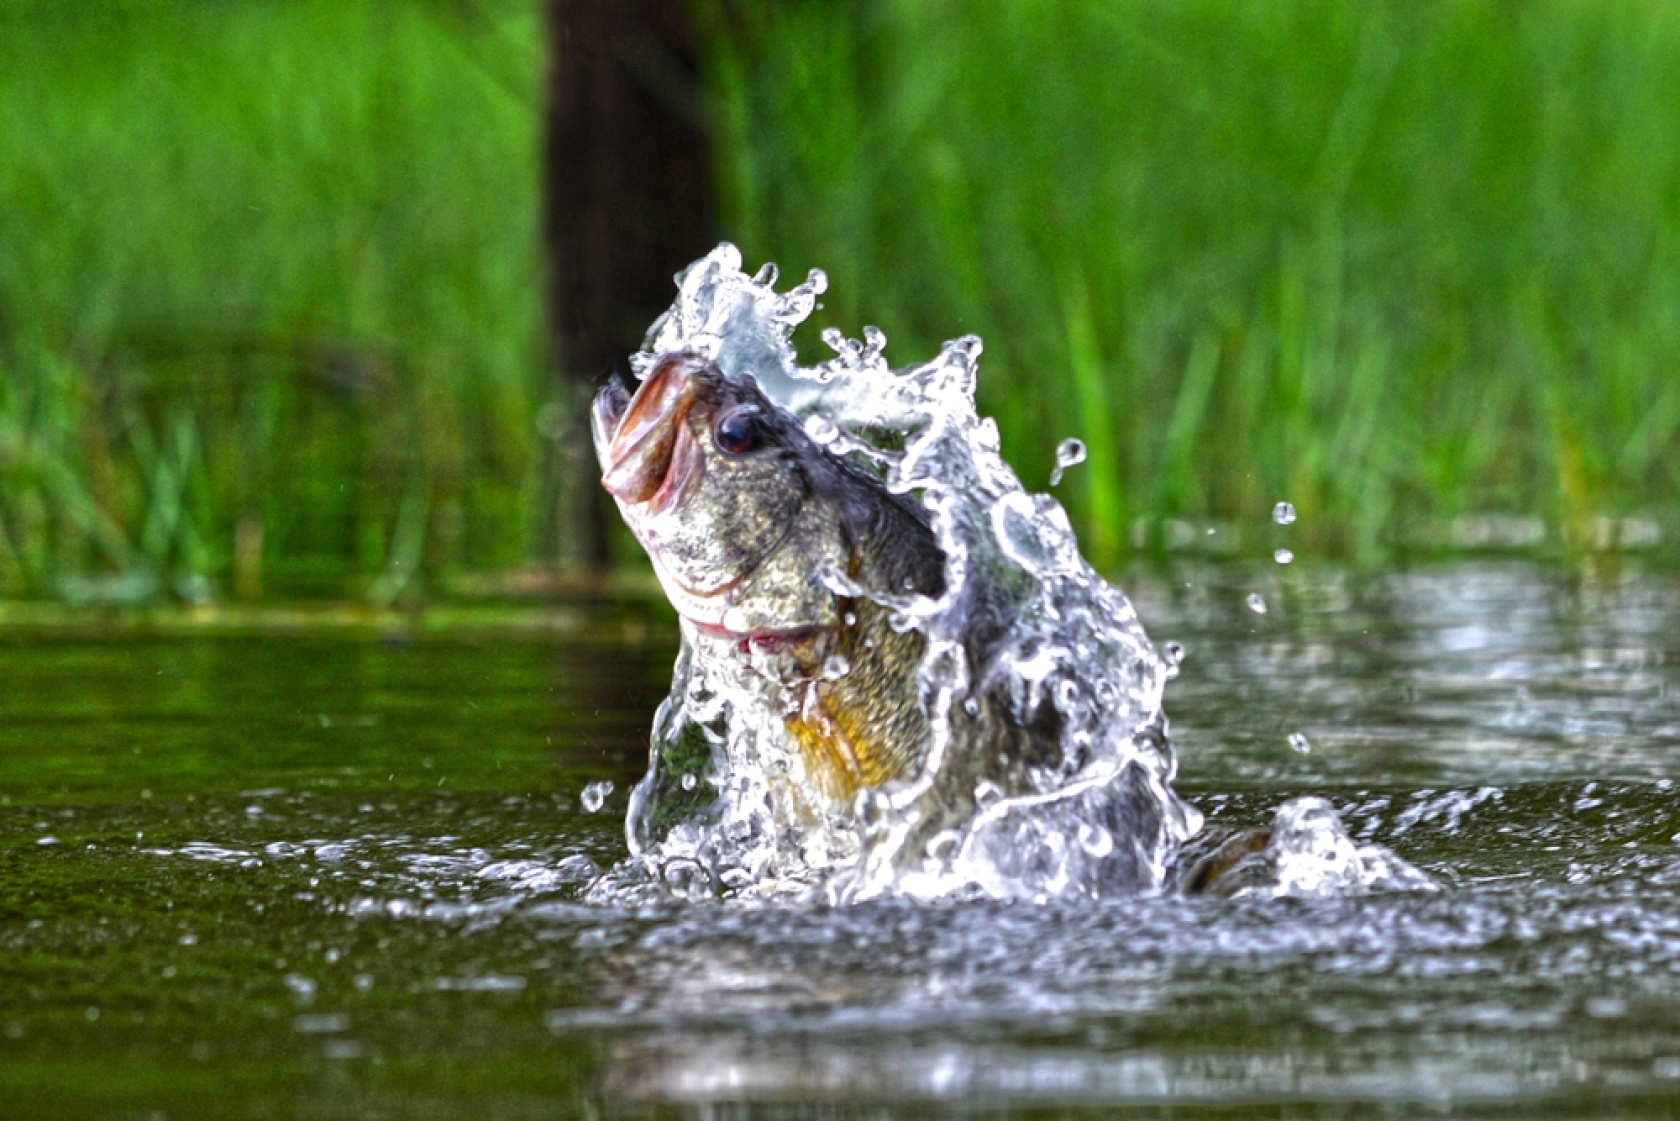 Check out the top 5 bass fishing records in Florida.